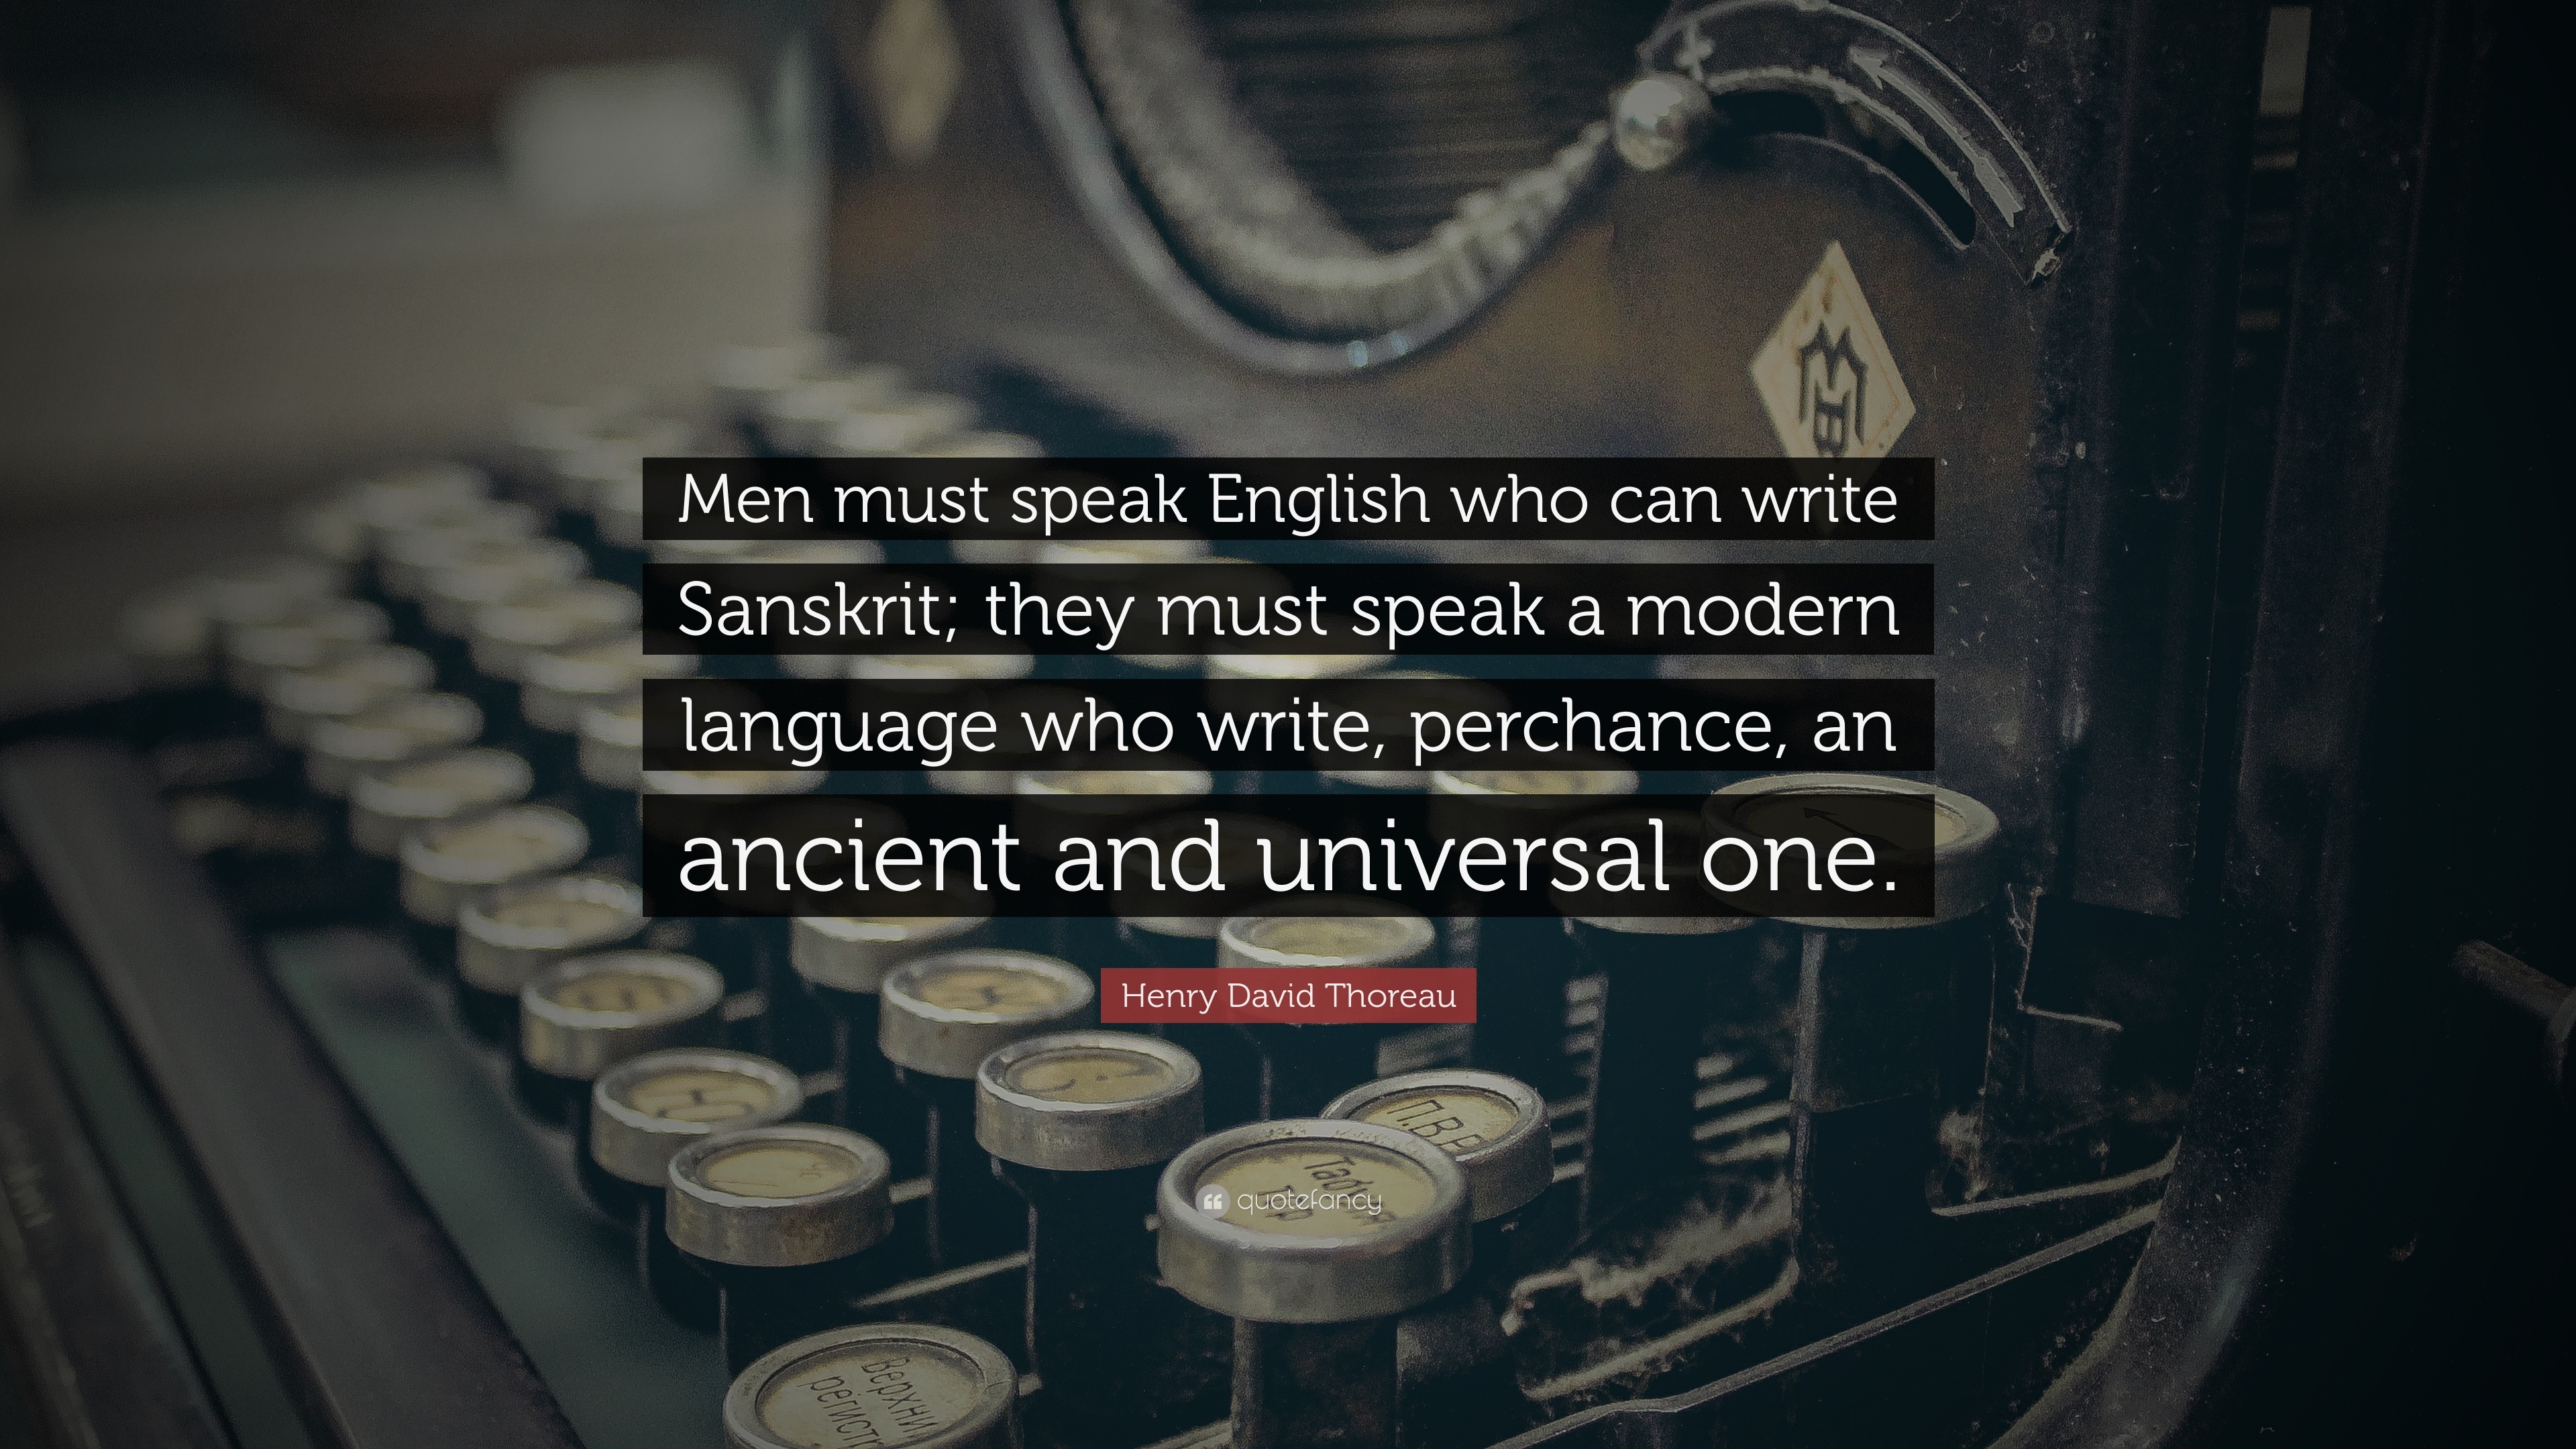 Henry David Thoreau Quote: “Men must speak English who can write Sanskrit;  they must speak a modern language who write, perchance, an ancient and  un...”